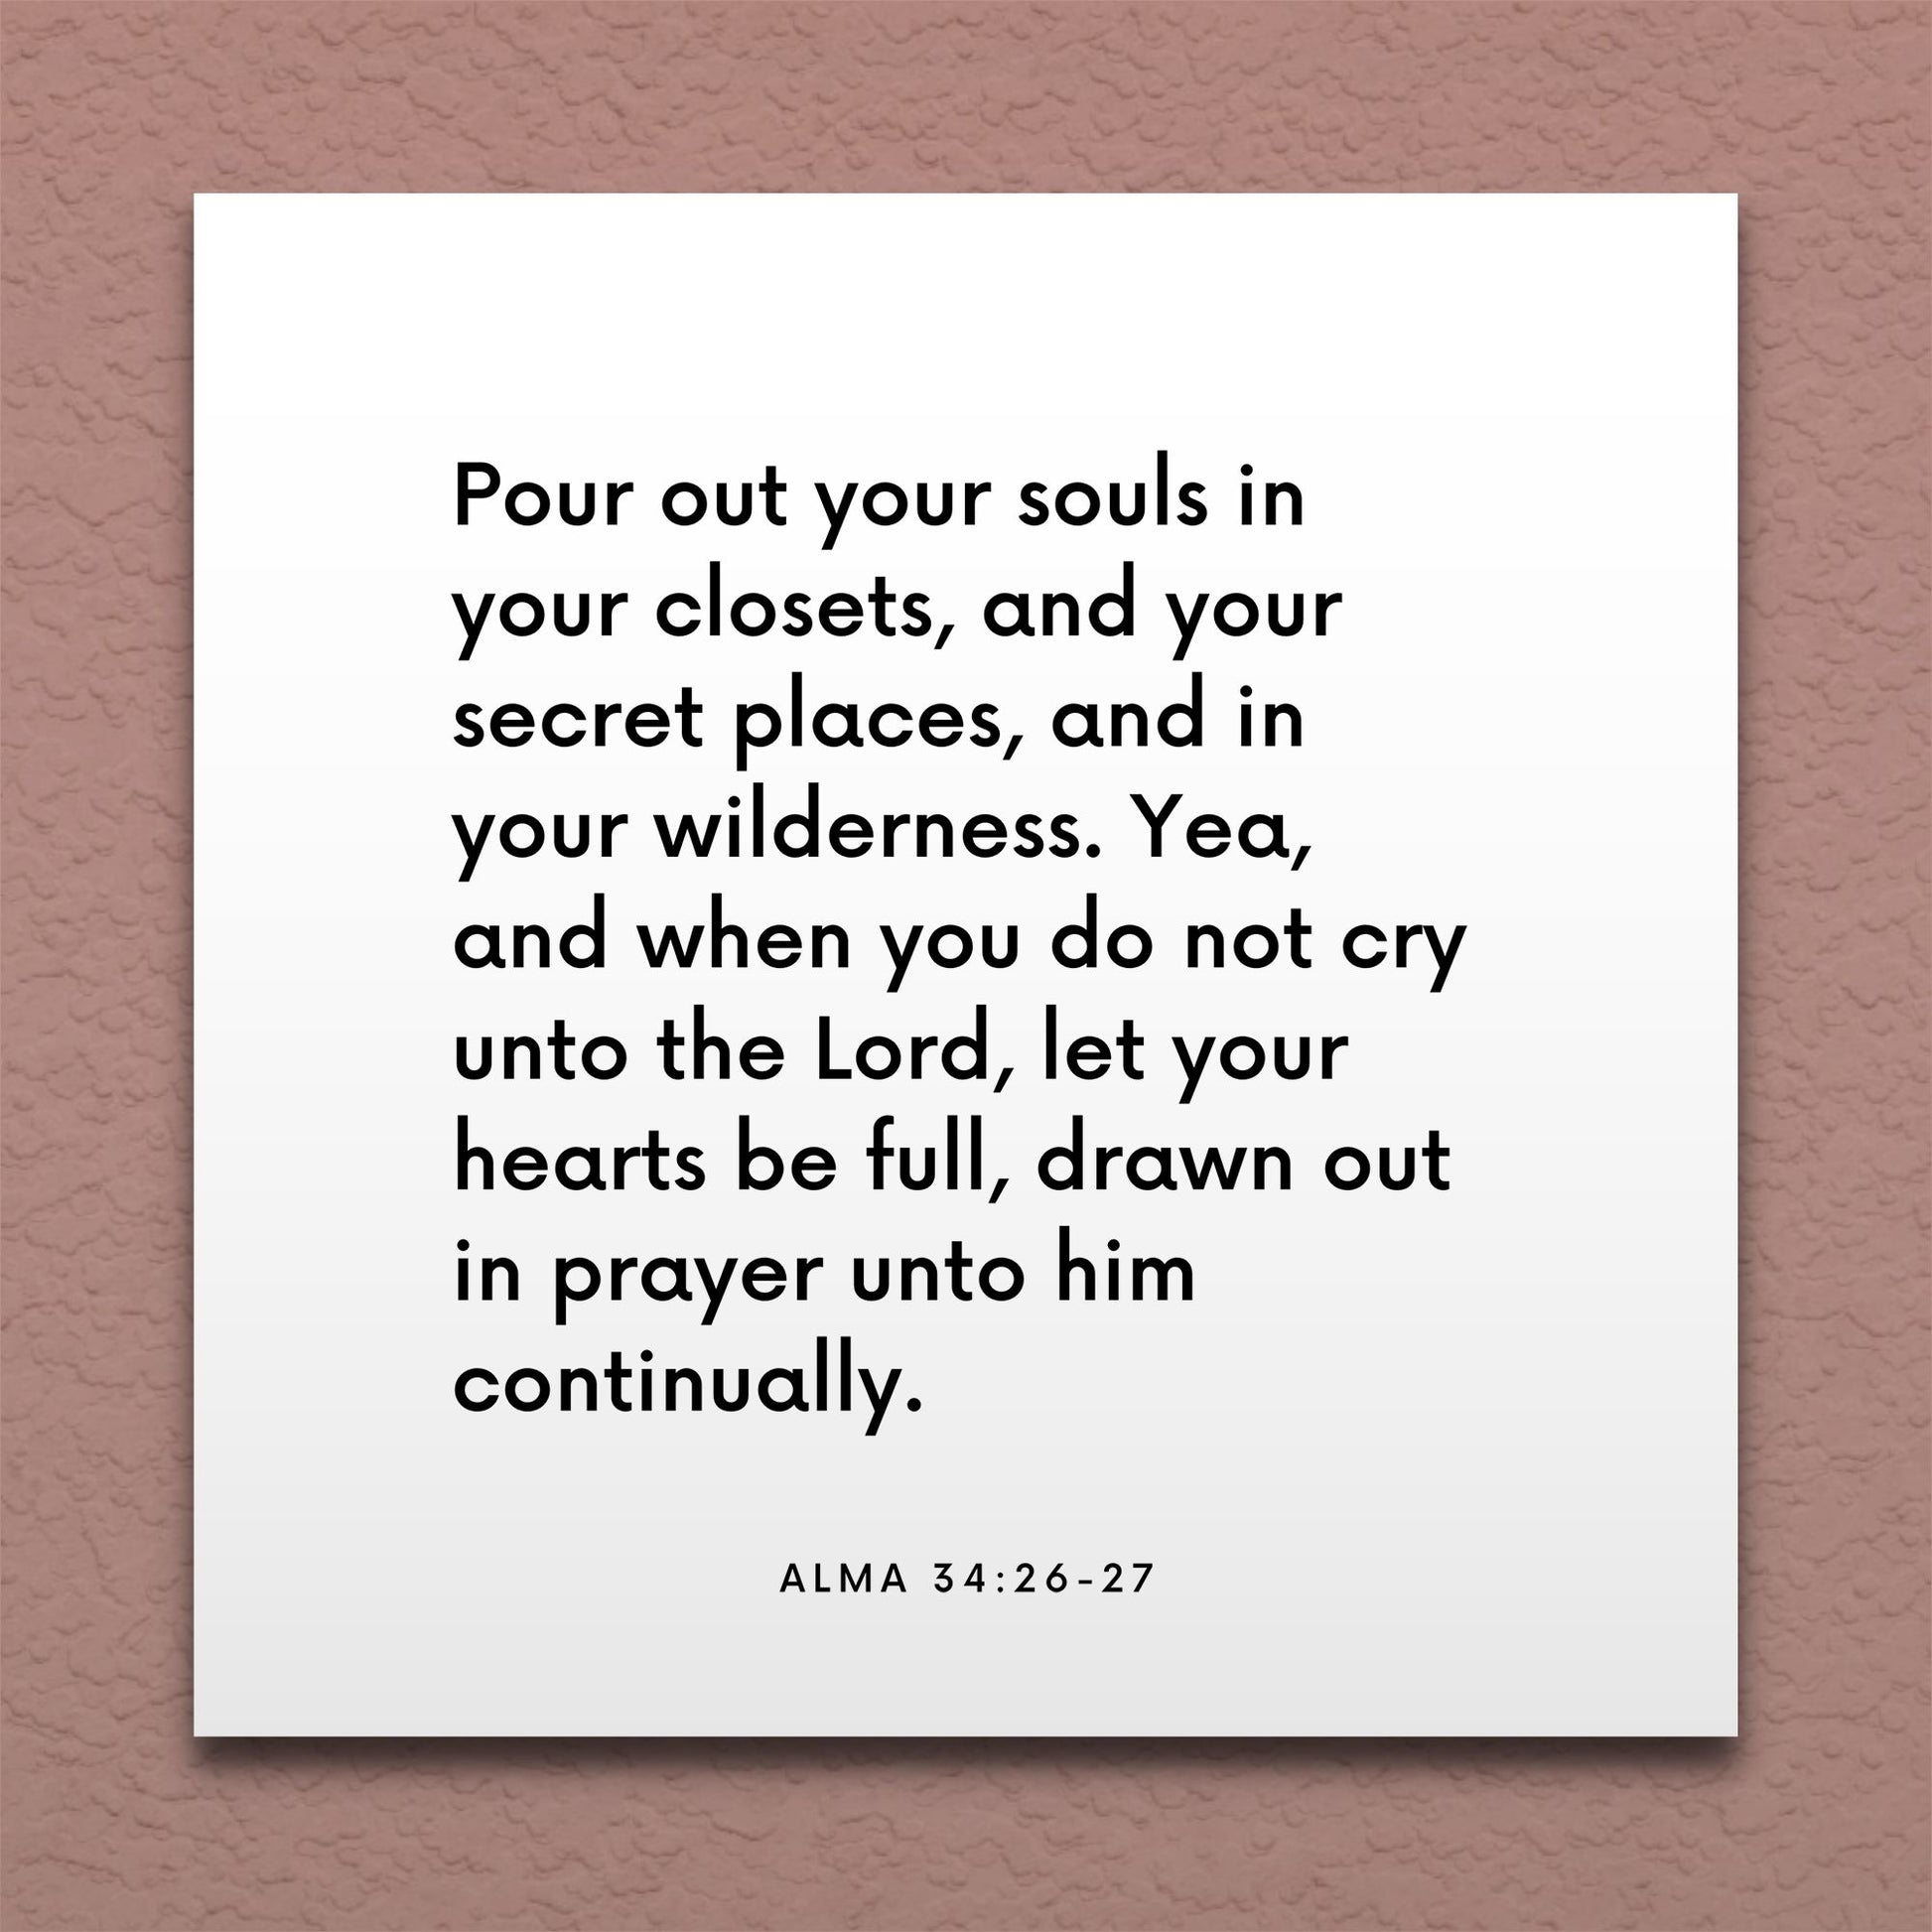 Wall-mounted scripture tile for Alma 34:26-27 - "Pour out your souls in your closets"